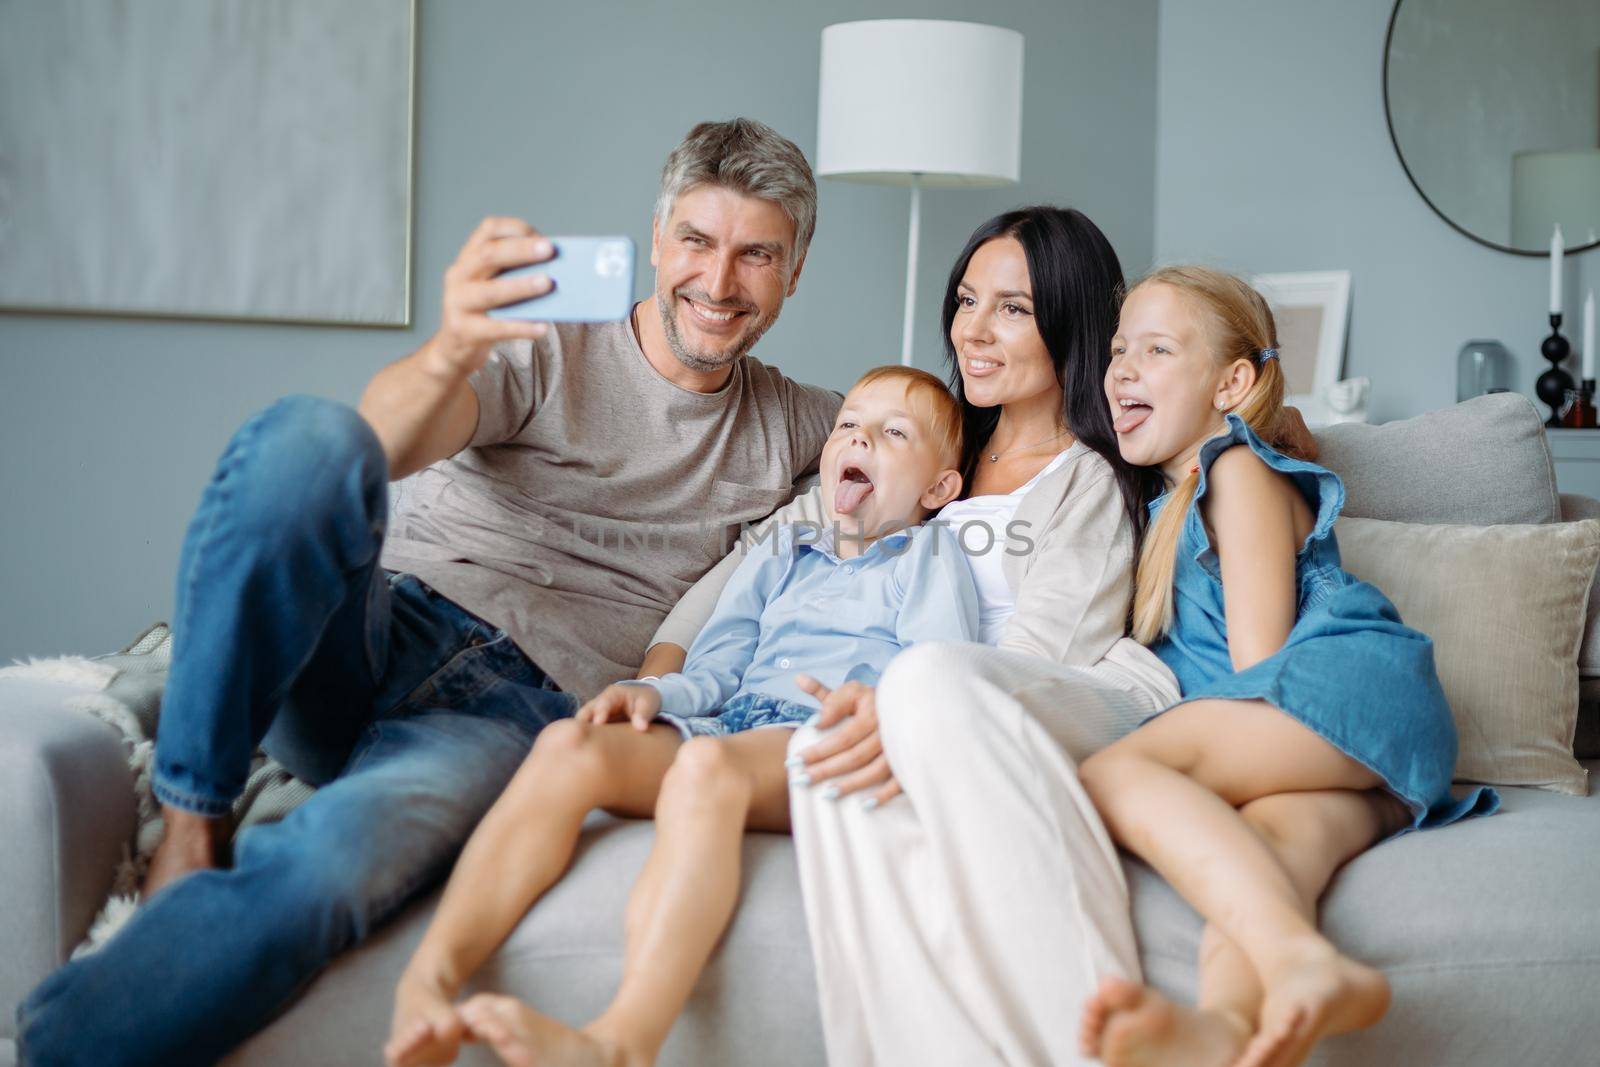 happy family with kids having fun taking selfies sitting on the couch. close-up.